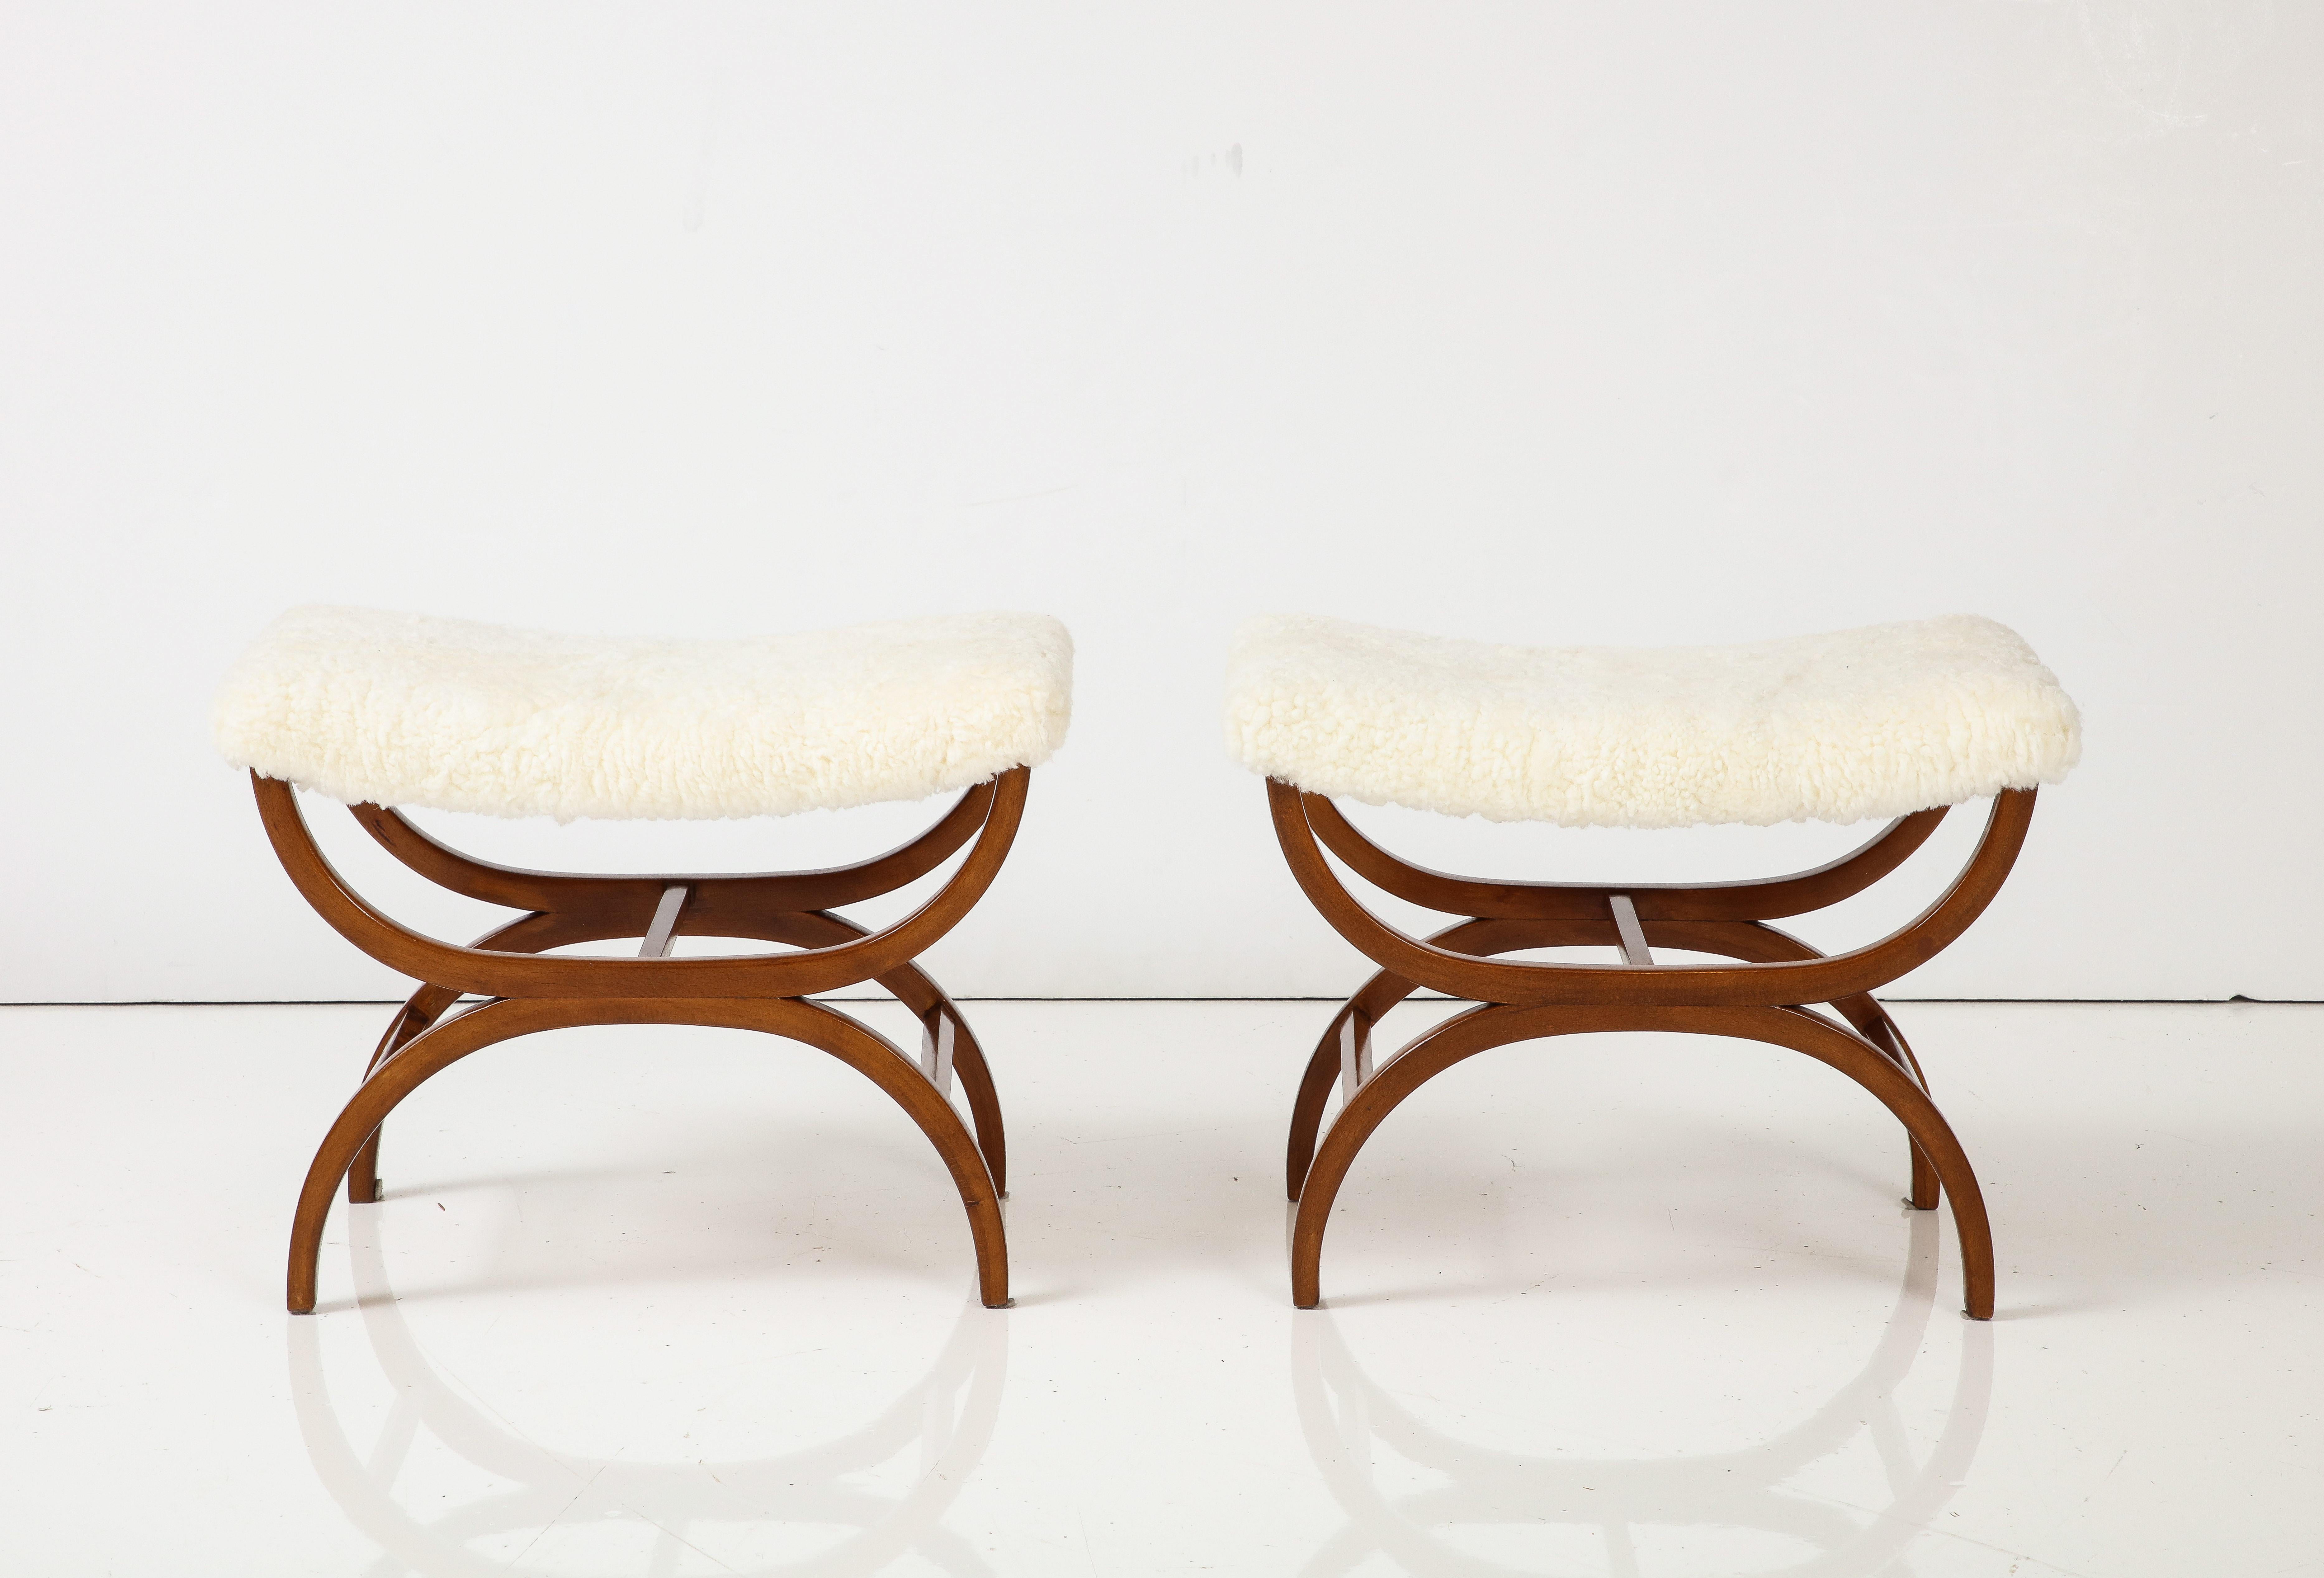 A pair of Swedish Modern mahogany stools, designed by David Rosen, circa 1940-50, of Curule form with a concave sheepskin seat.